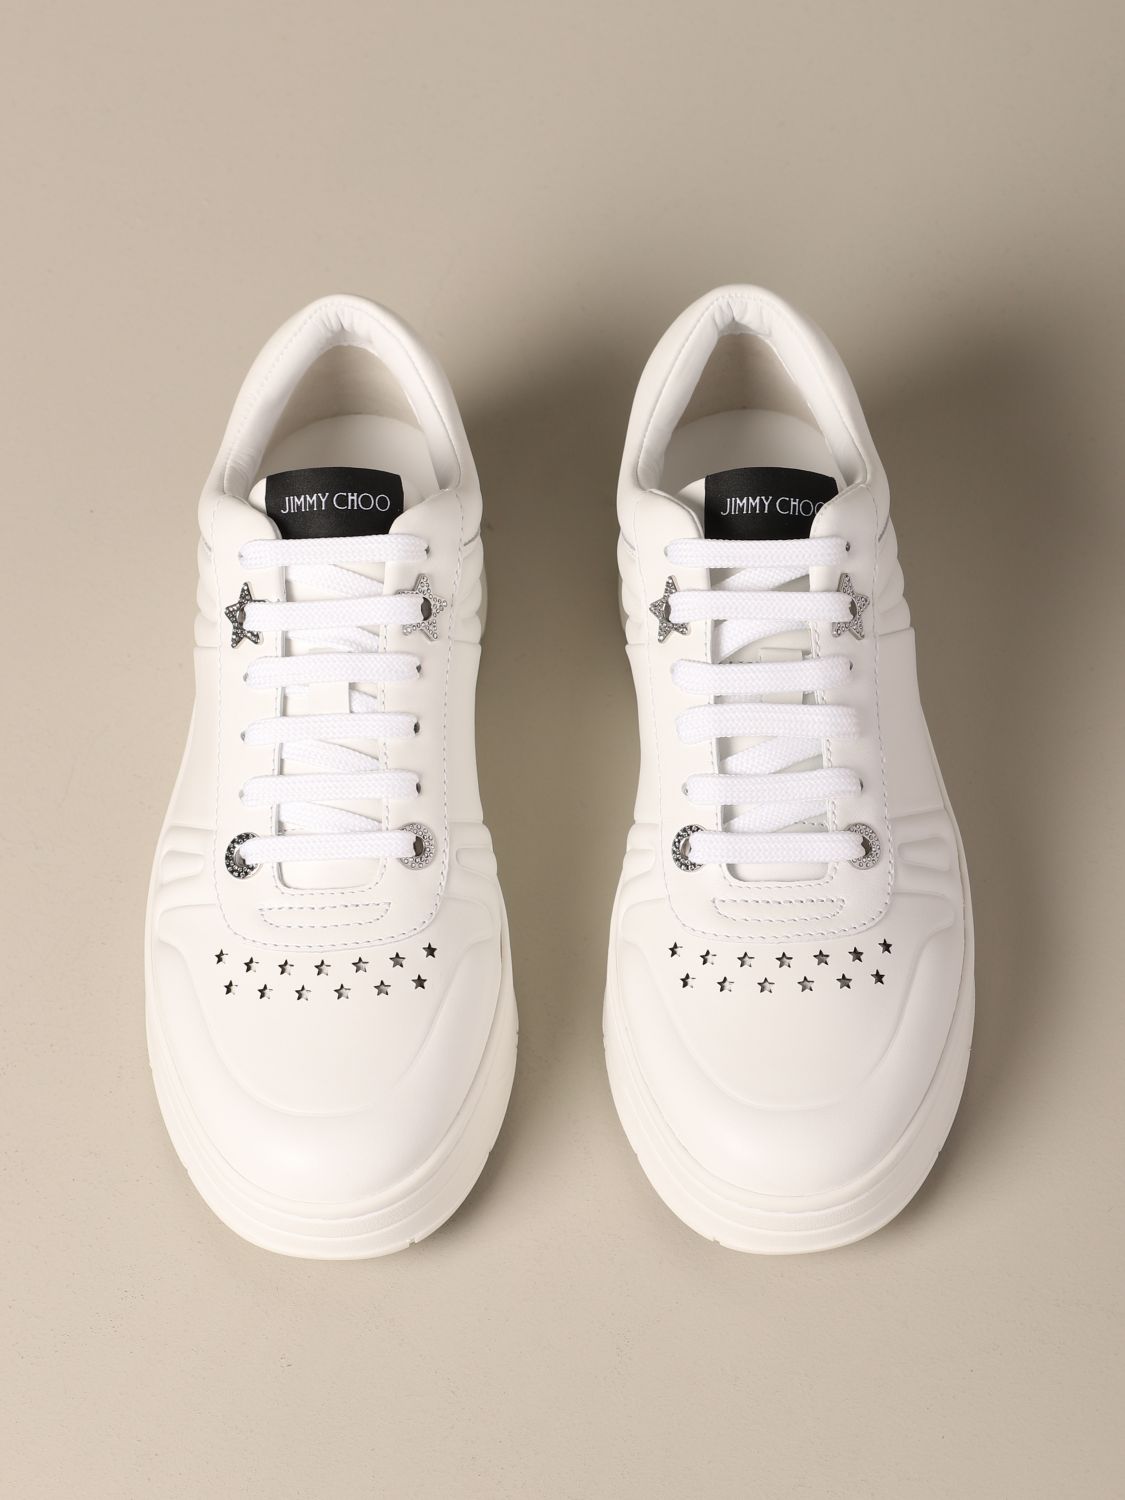 Hawaii Jimmy Choo leather sneakers with 